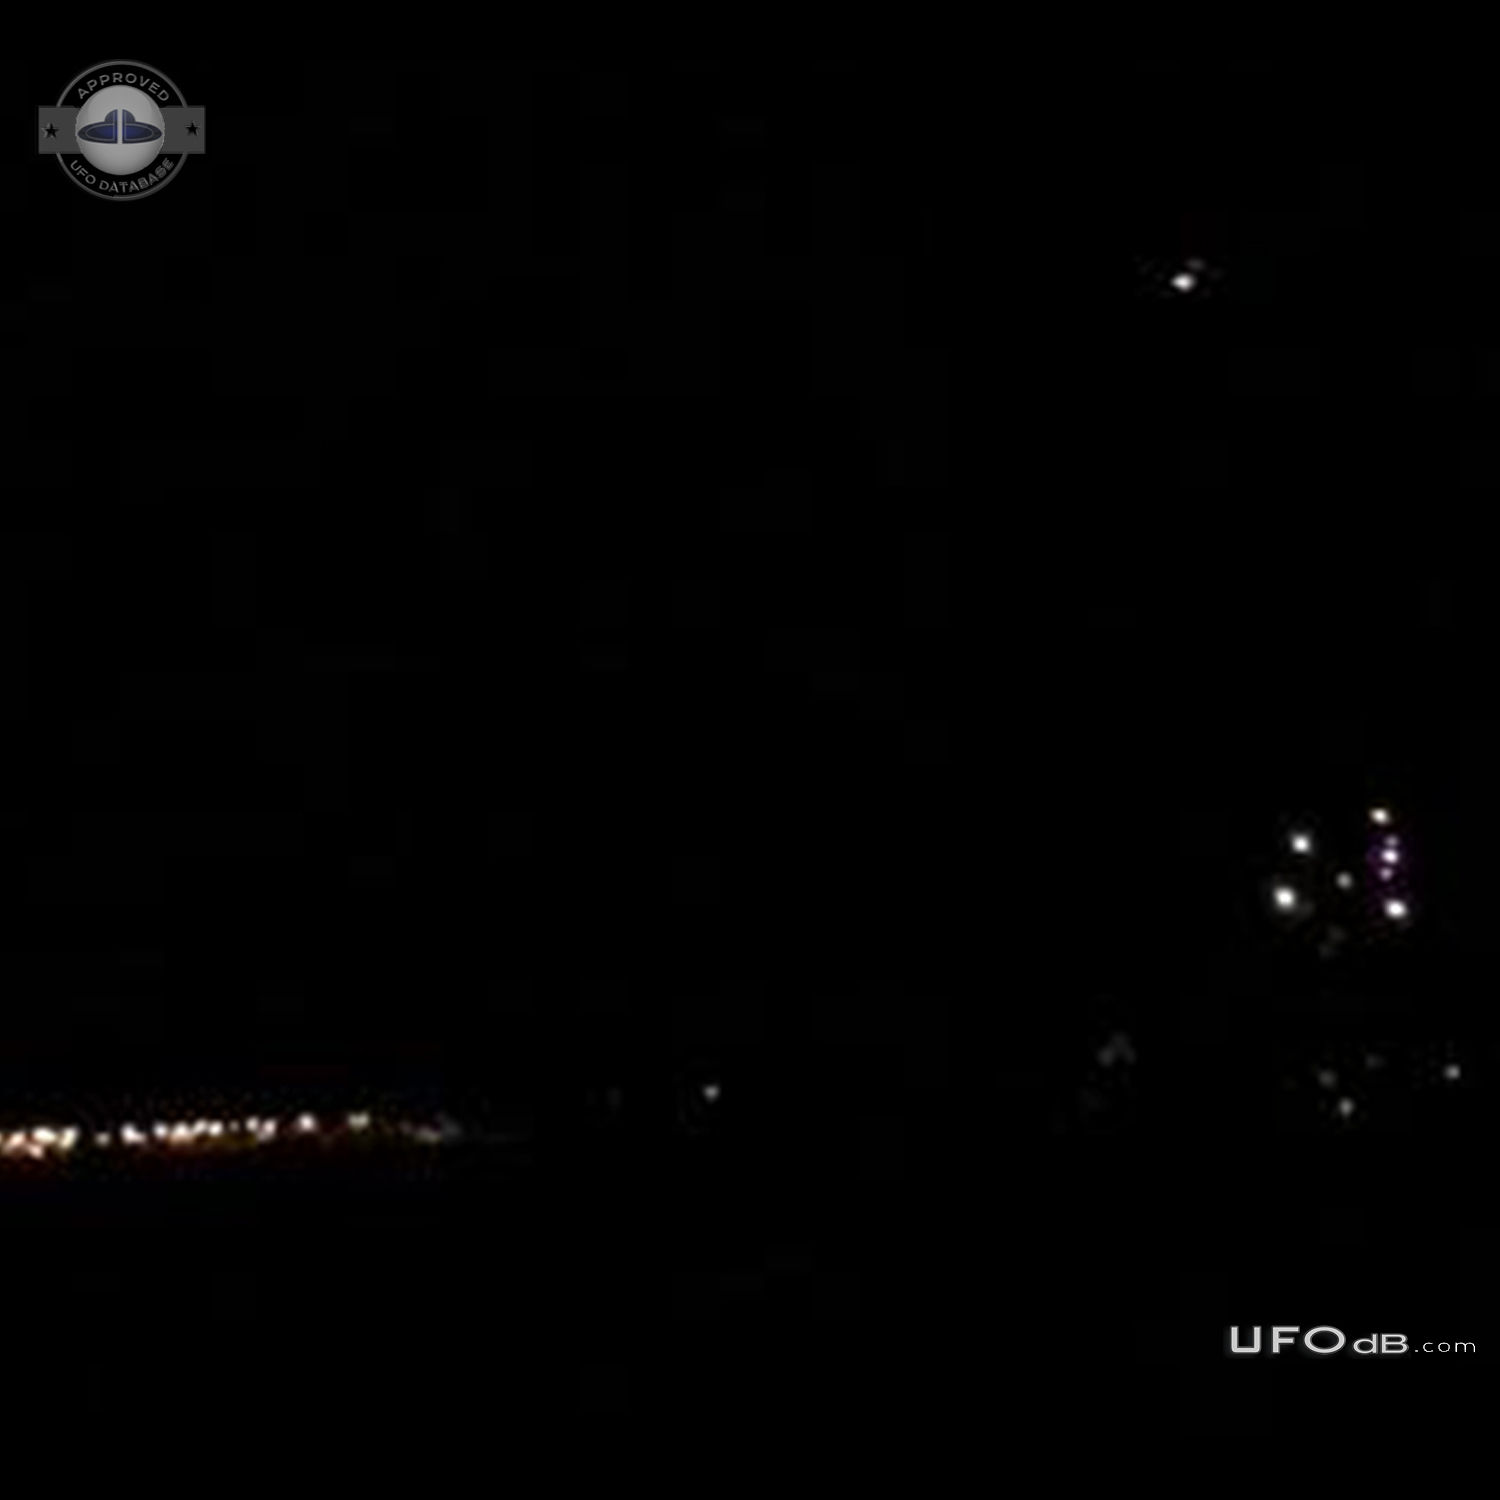 Cluster of lights UFOS seemed to form a triangular shape Colorado 2013 UFO Picture #695-2